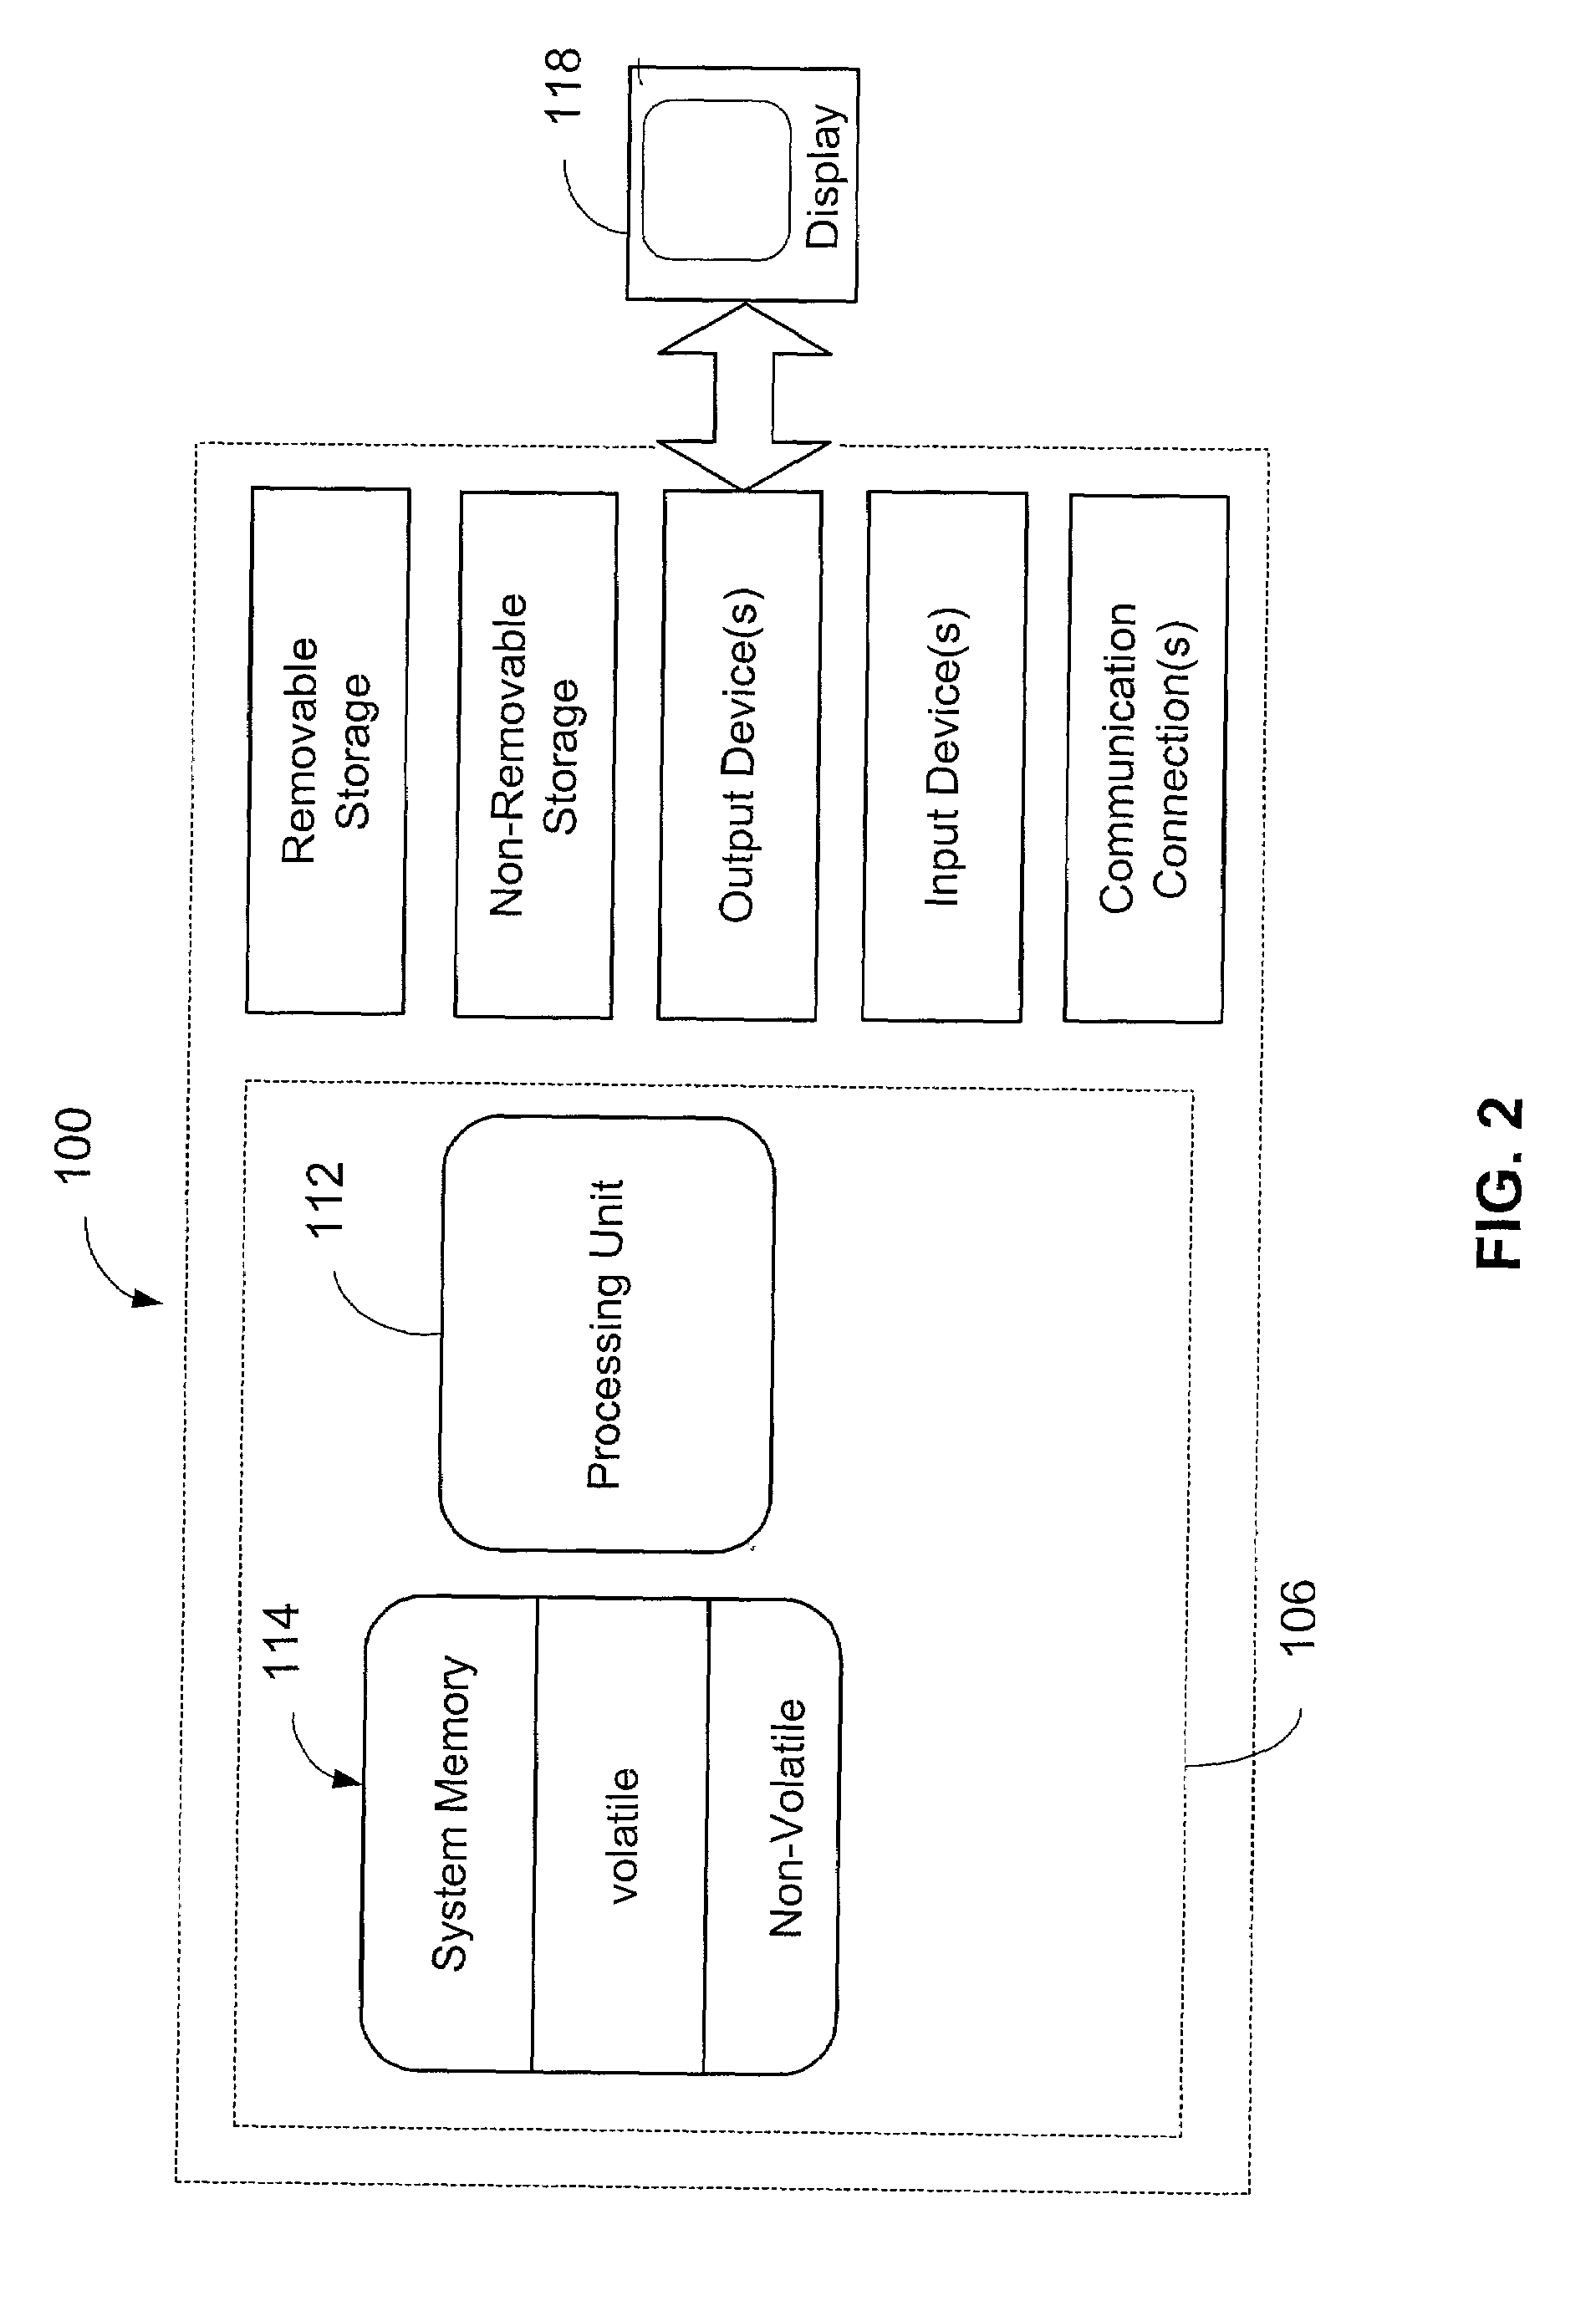 Method and system for obtaining computer shutdown information